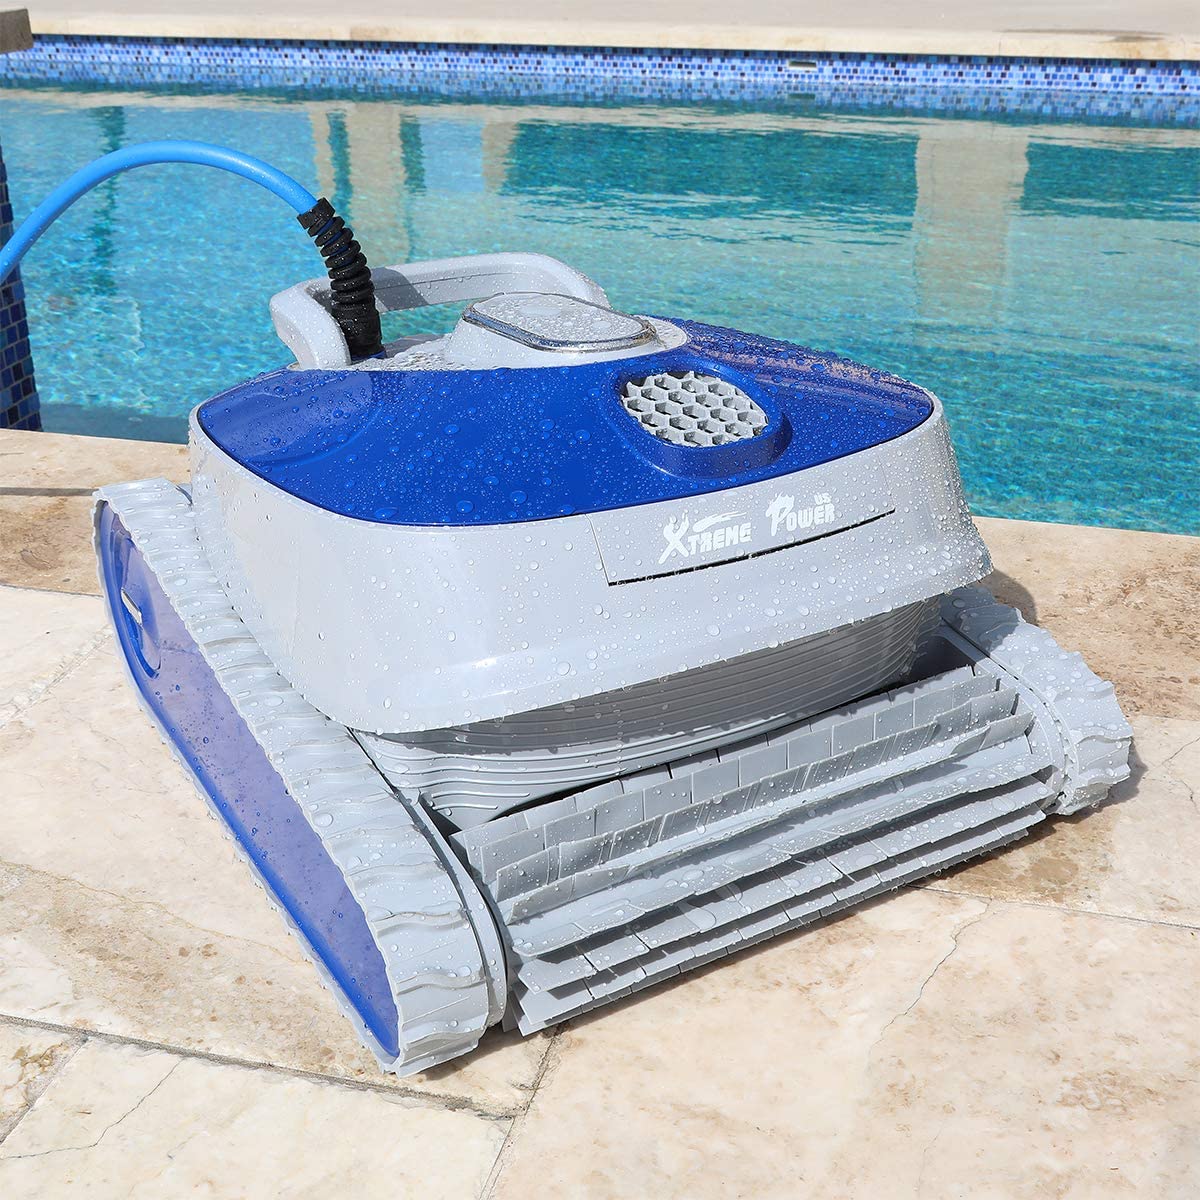 Top 8 Best Automatic Pool Cleaners in 2022